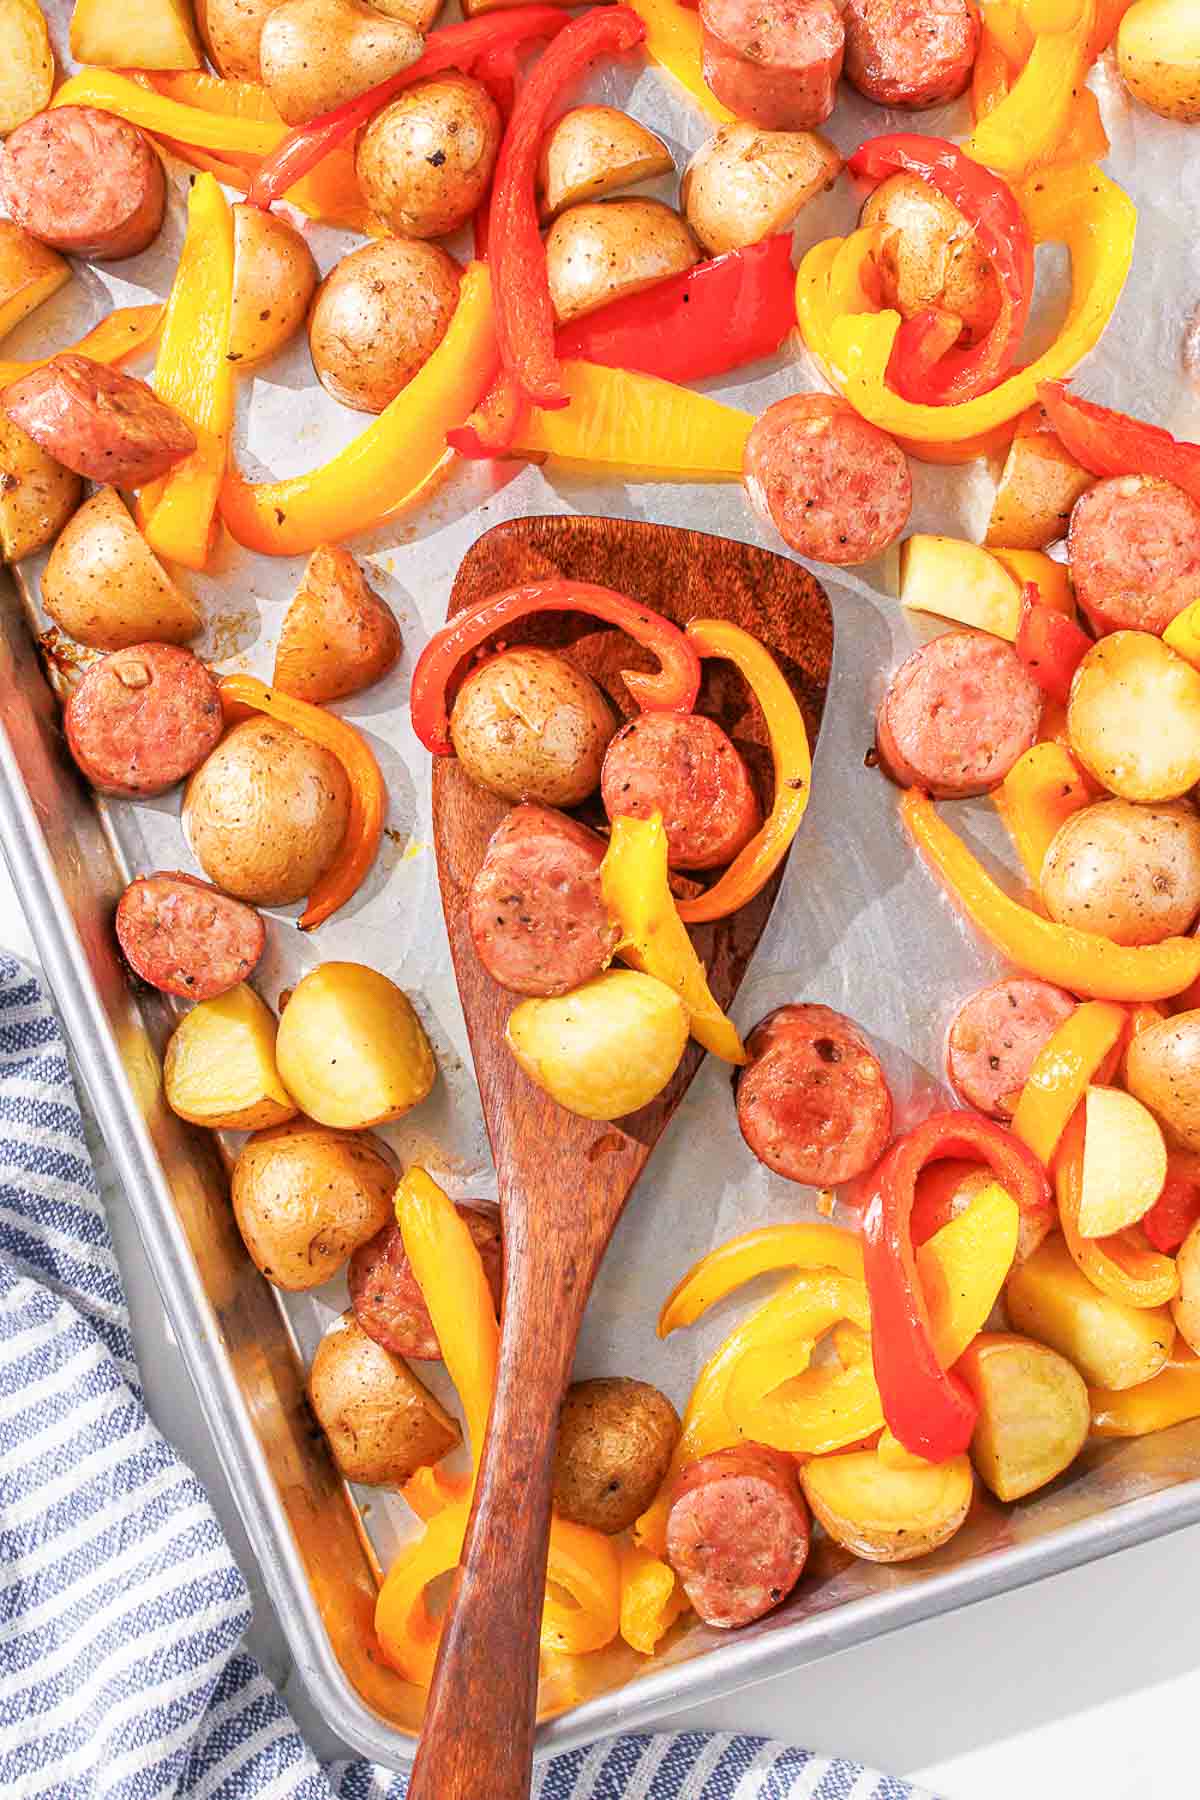 A baking sheet with potatoes, chicken sausage and peppers.